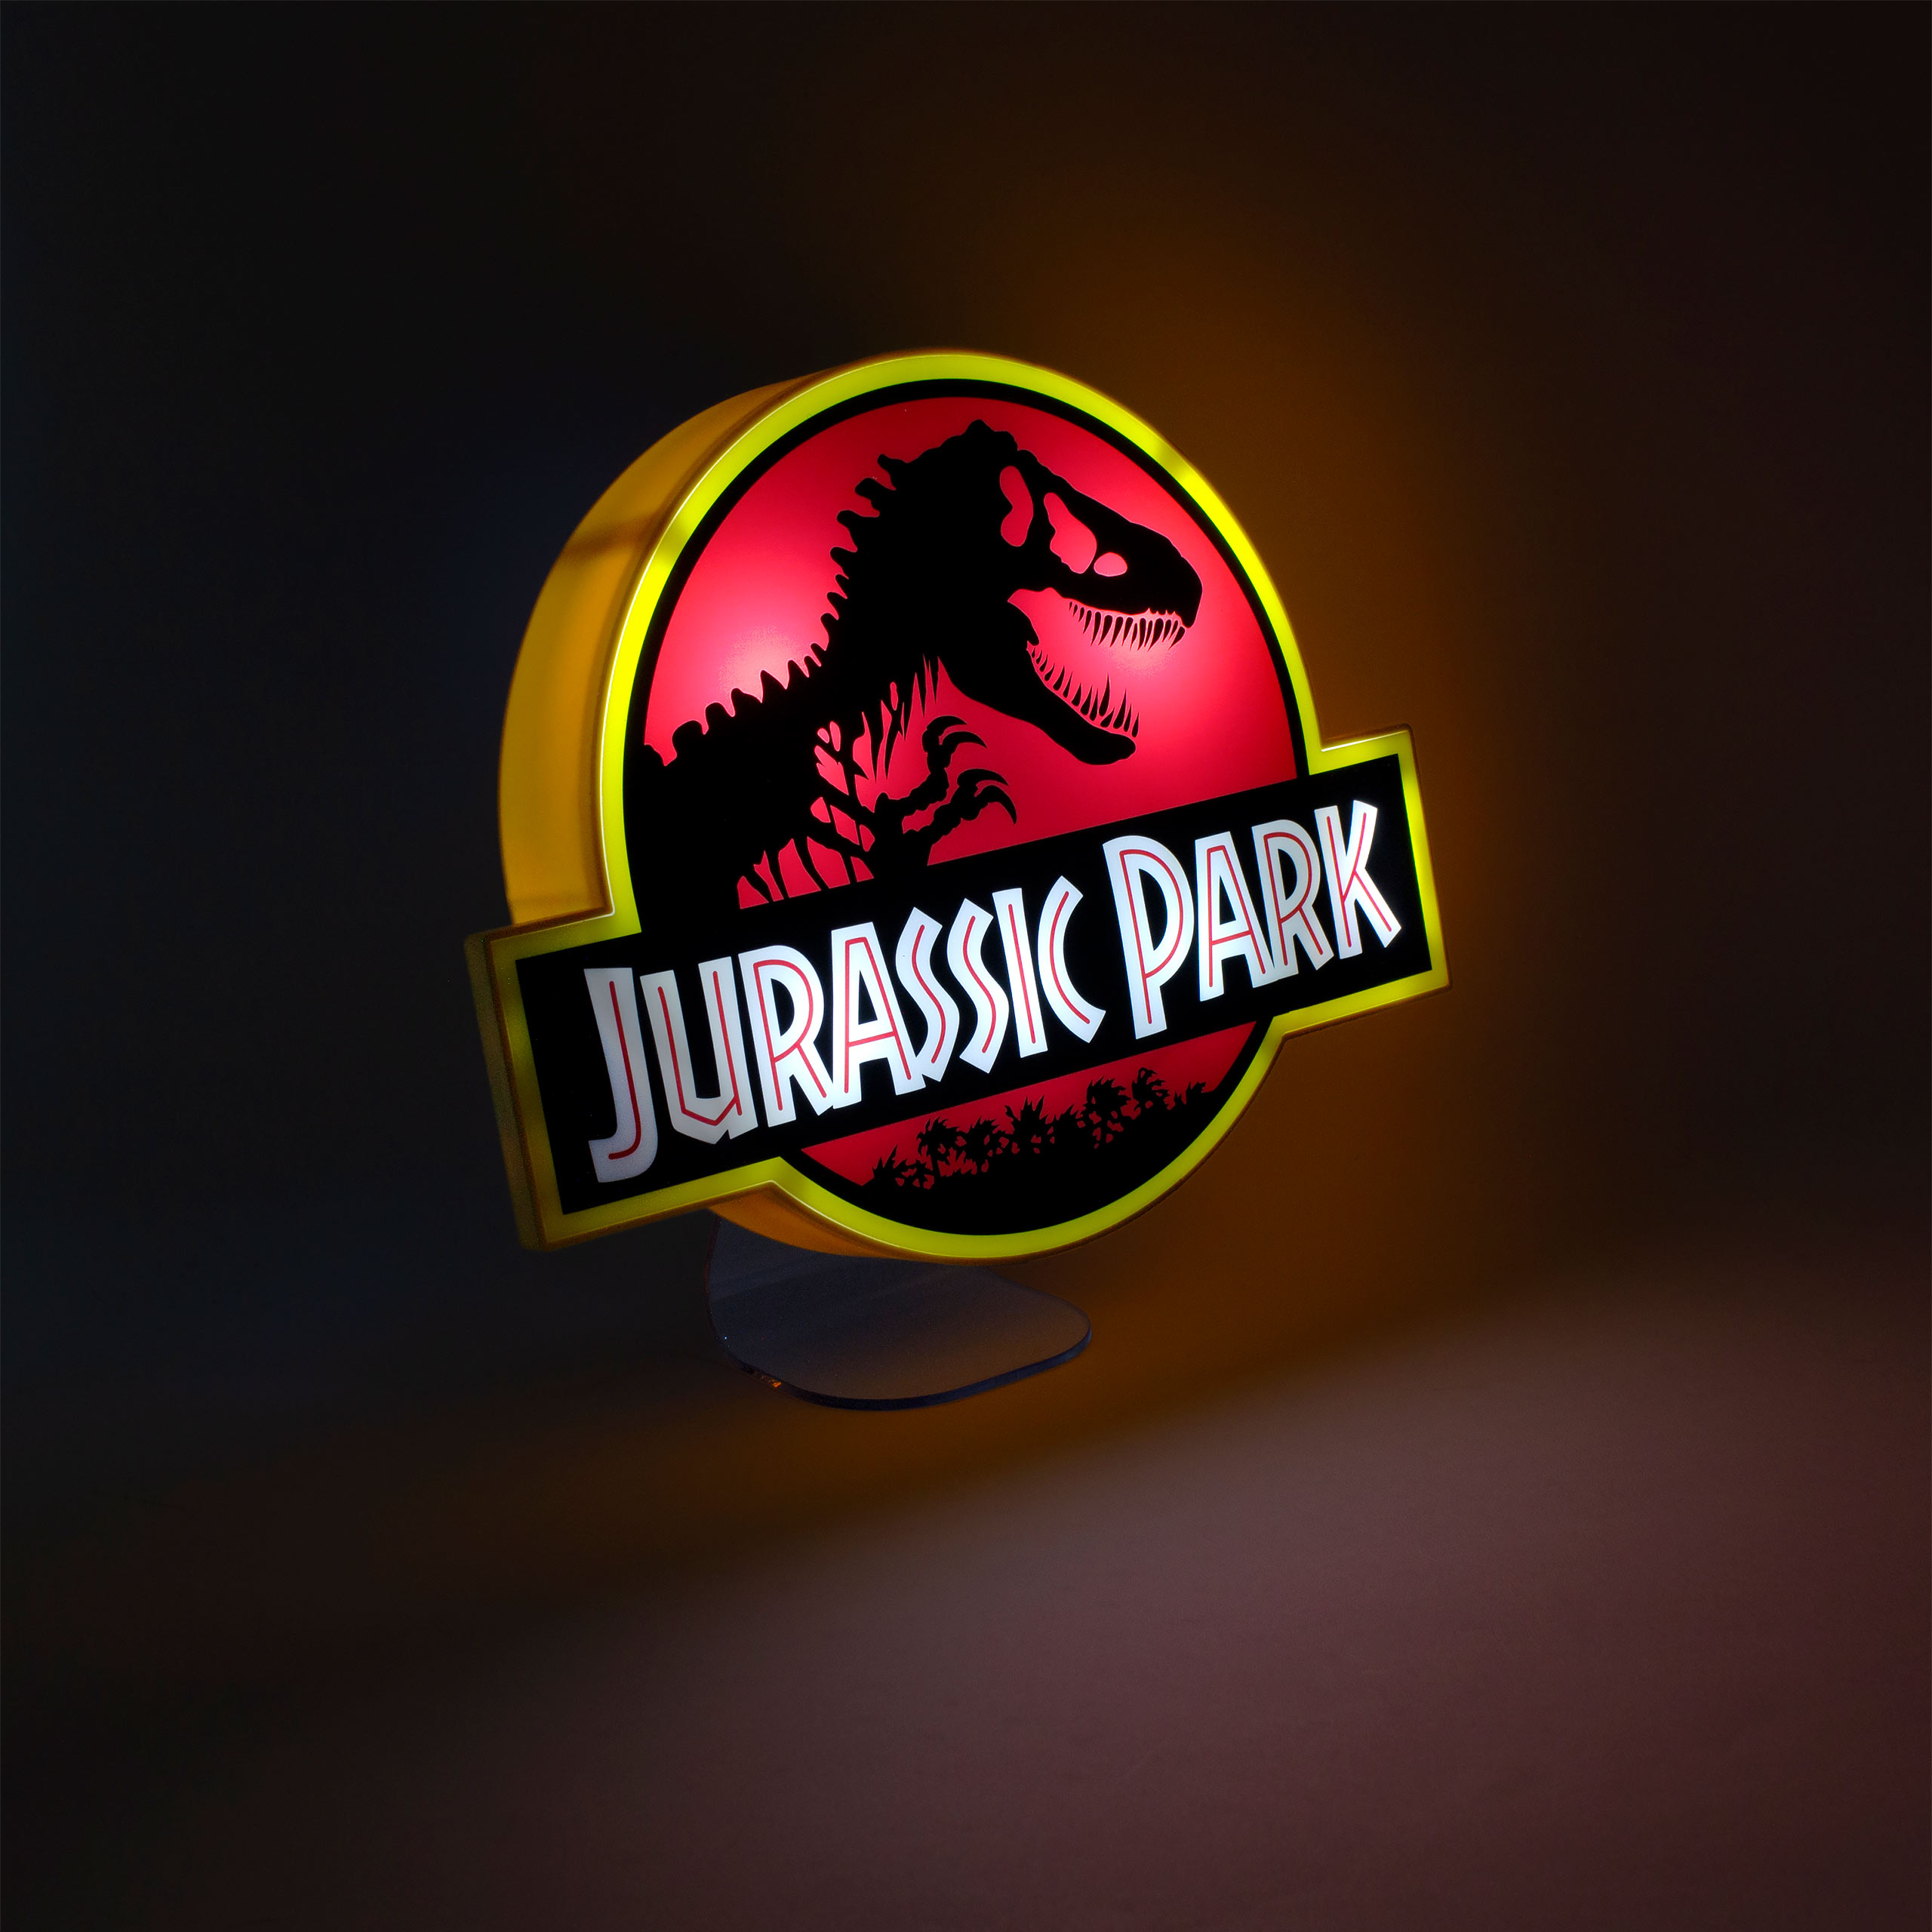 Jurassic Park - Logo Lamp including Stand